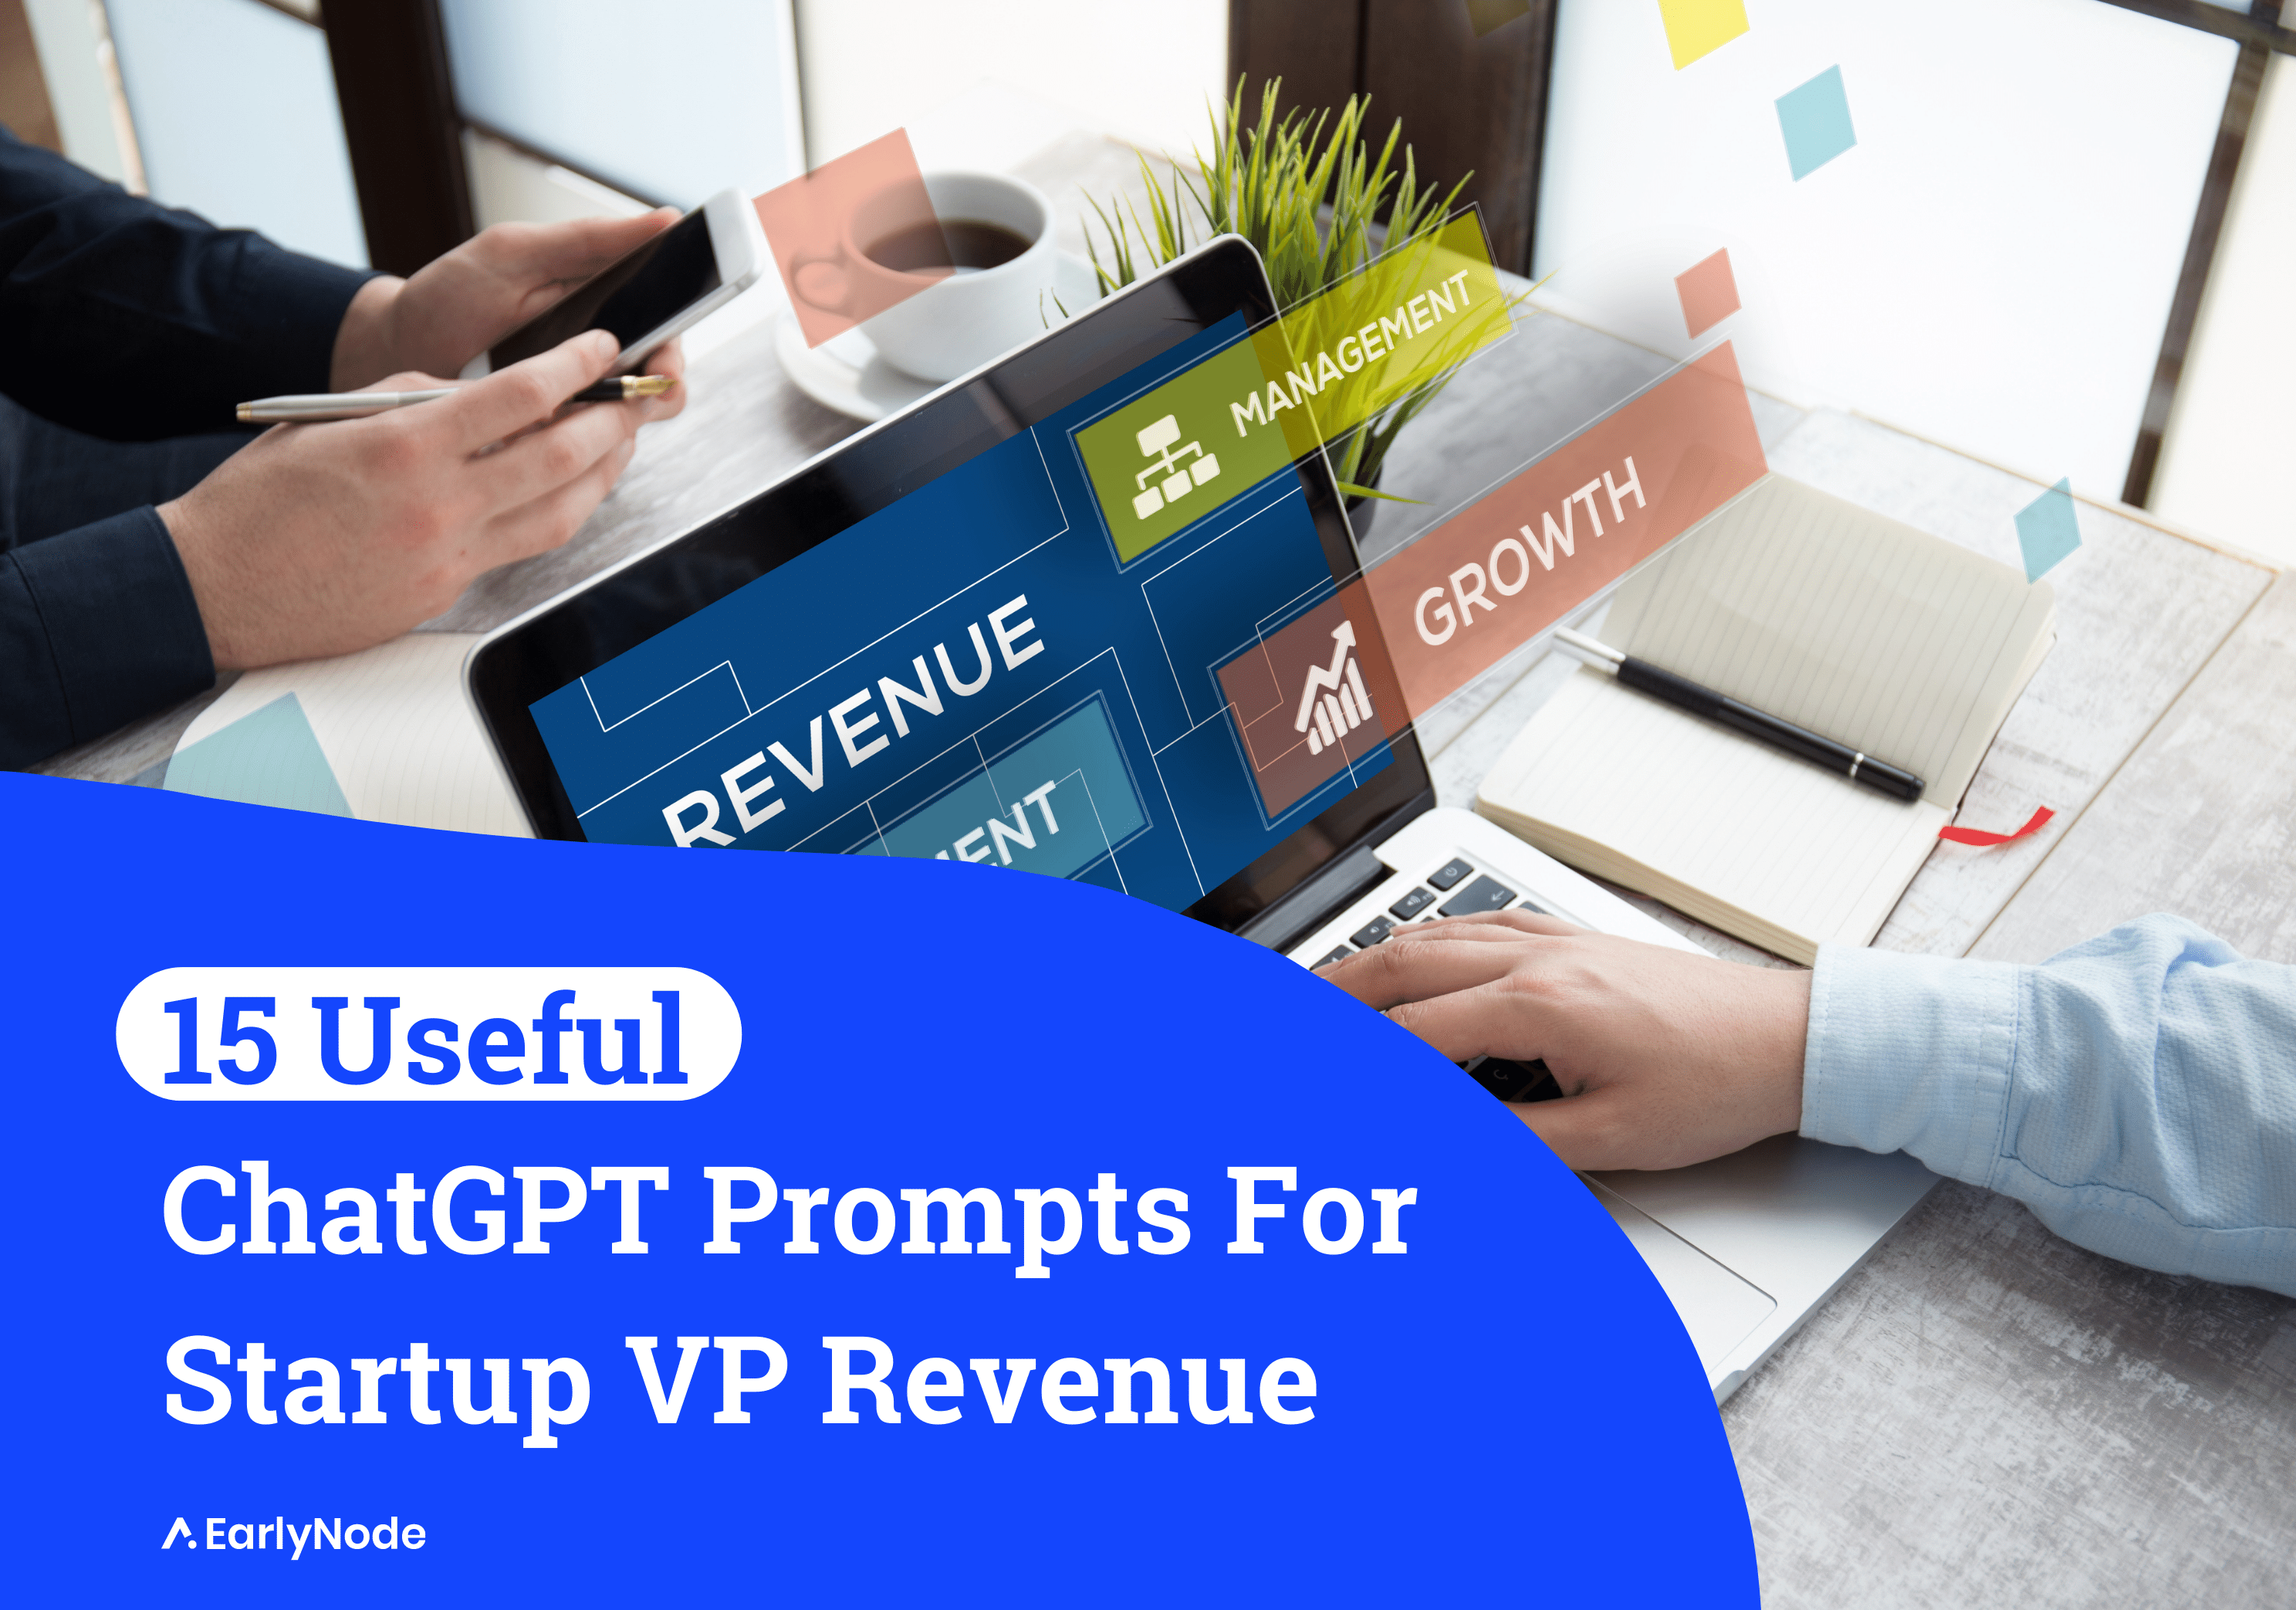 15 ChatGPT Prompts For VP Revenue To Use & Drive Growth